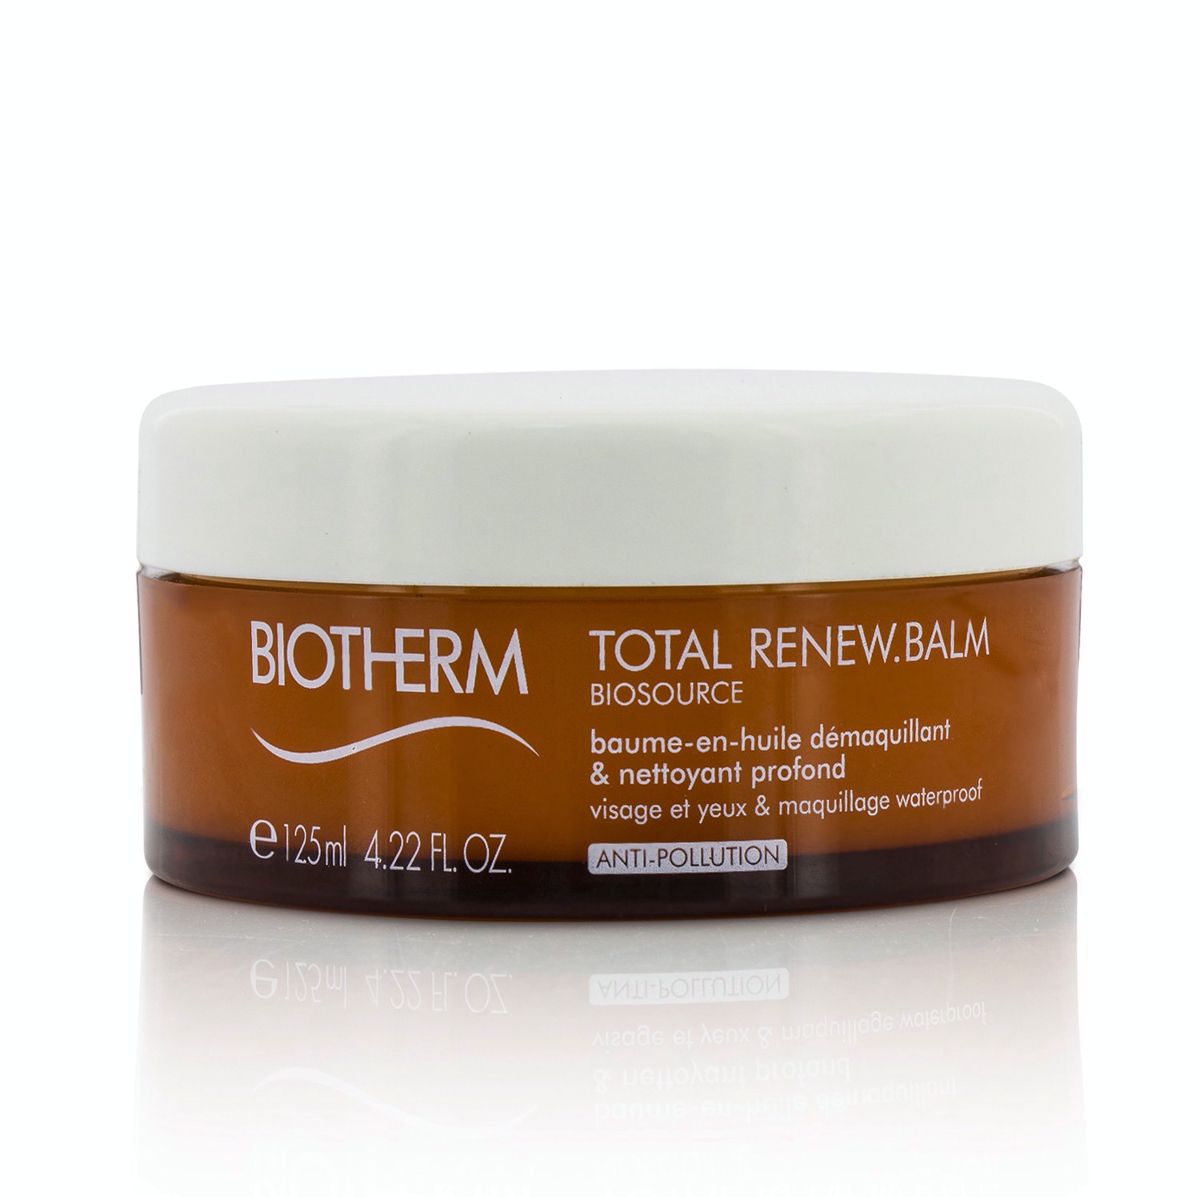 Biosource Total Renew Balm Balm-To-Oil Deep Cleanser - For Face  Eyes  Waterproof Make-Up Biotherm Image